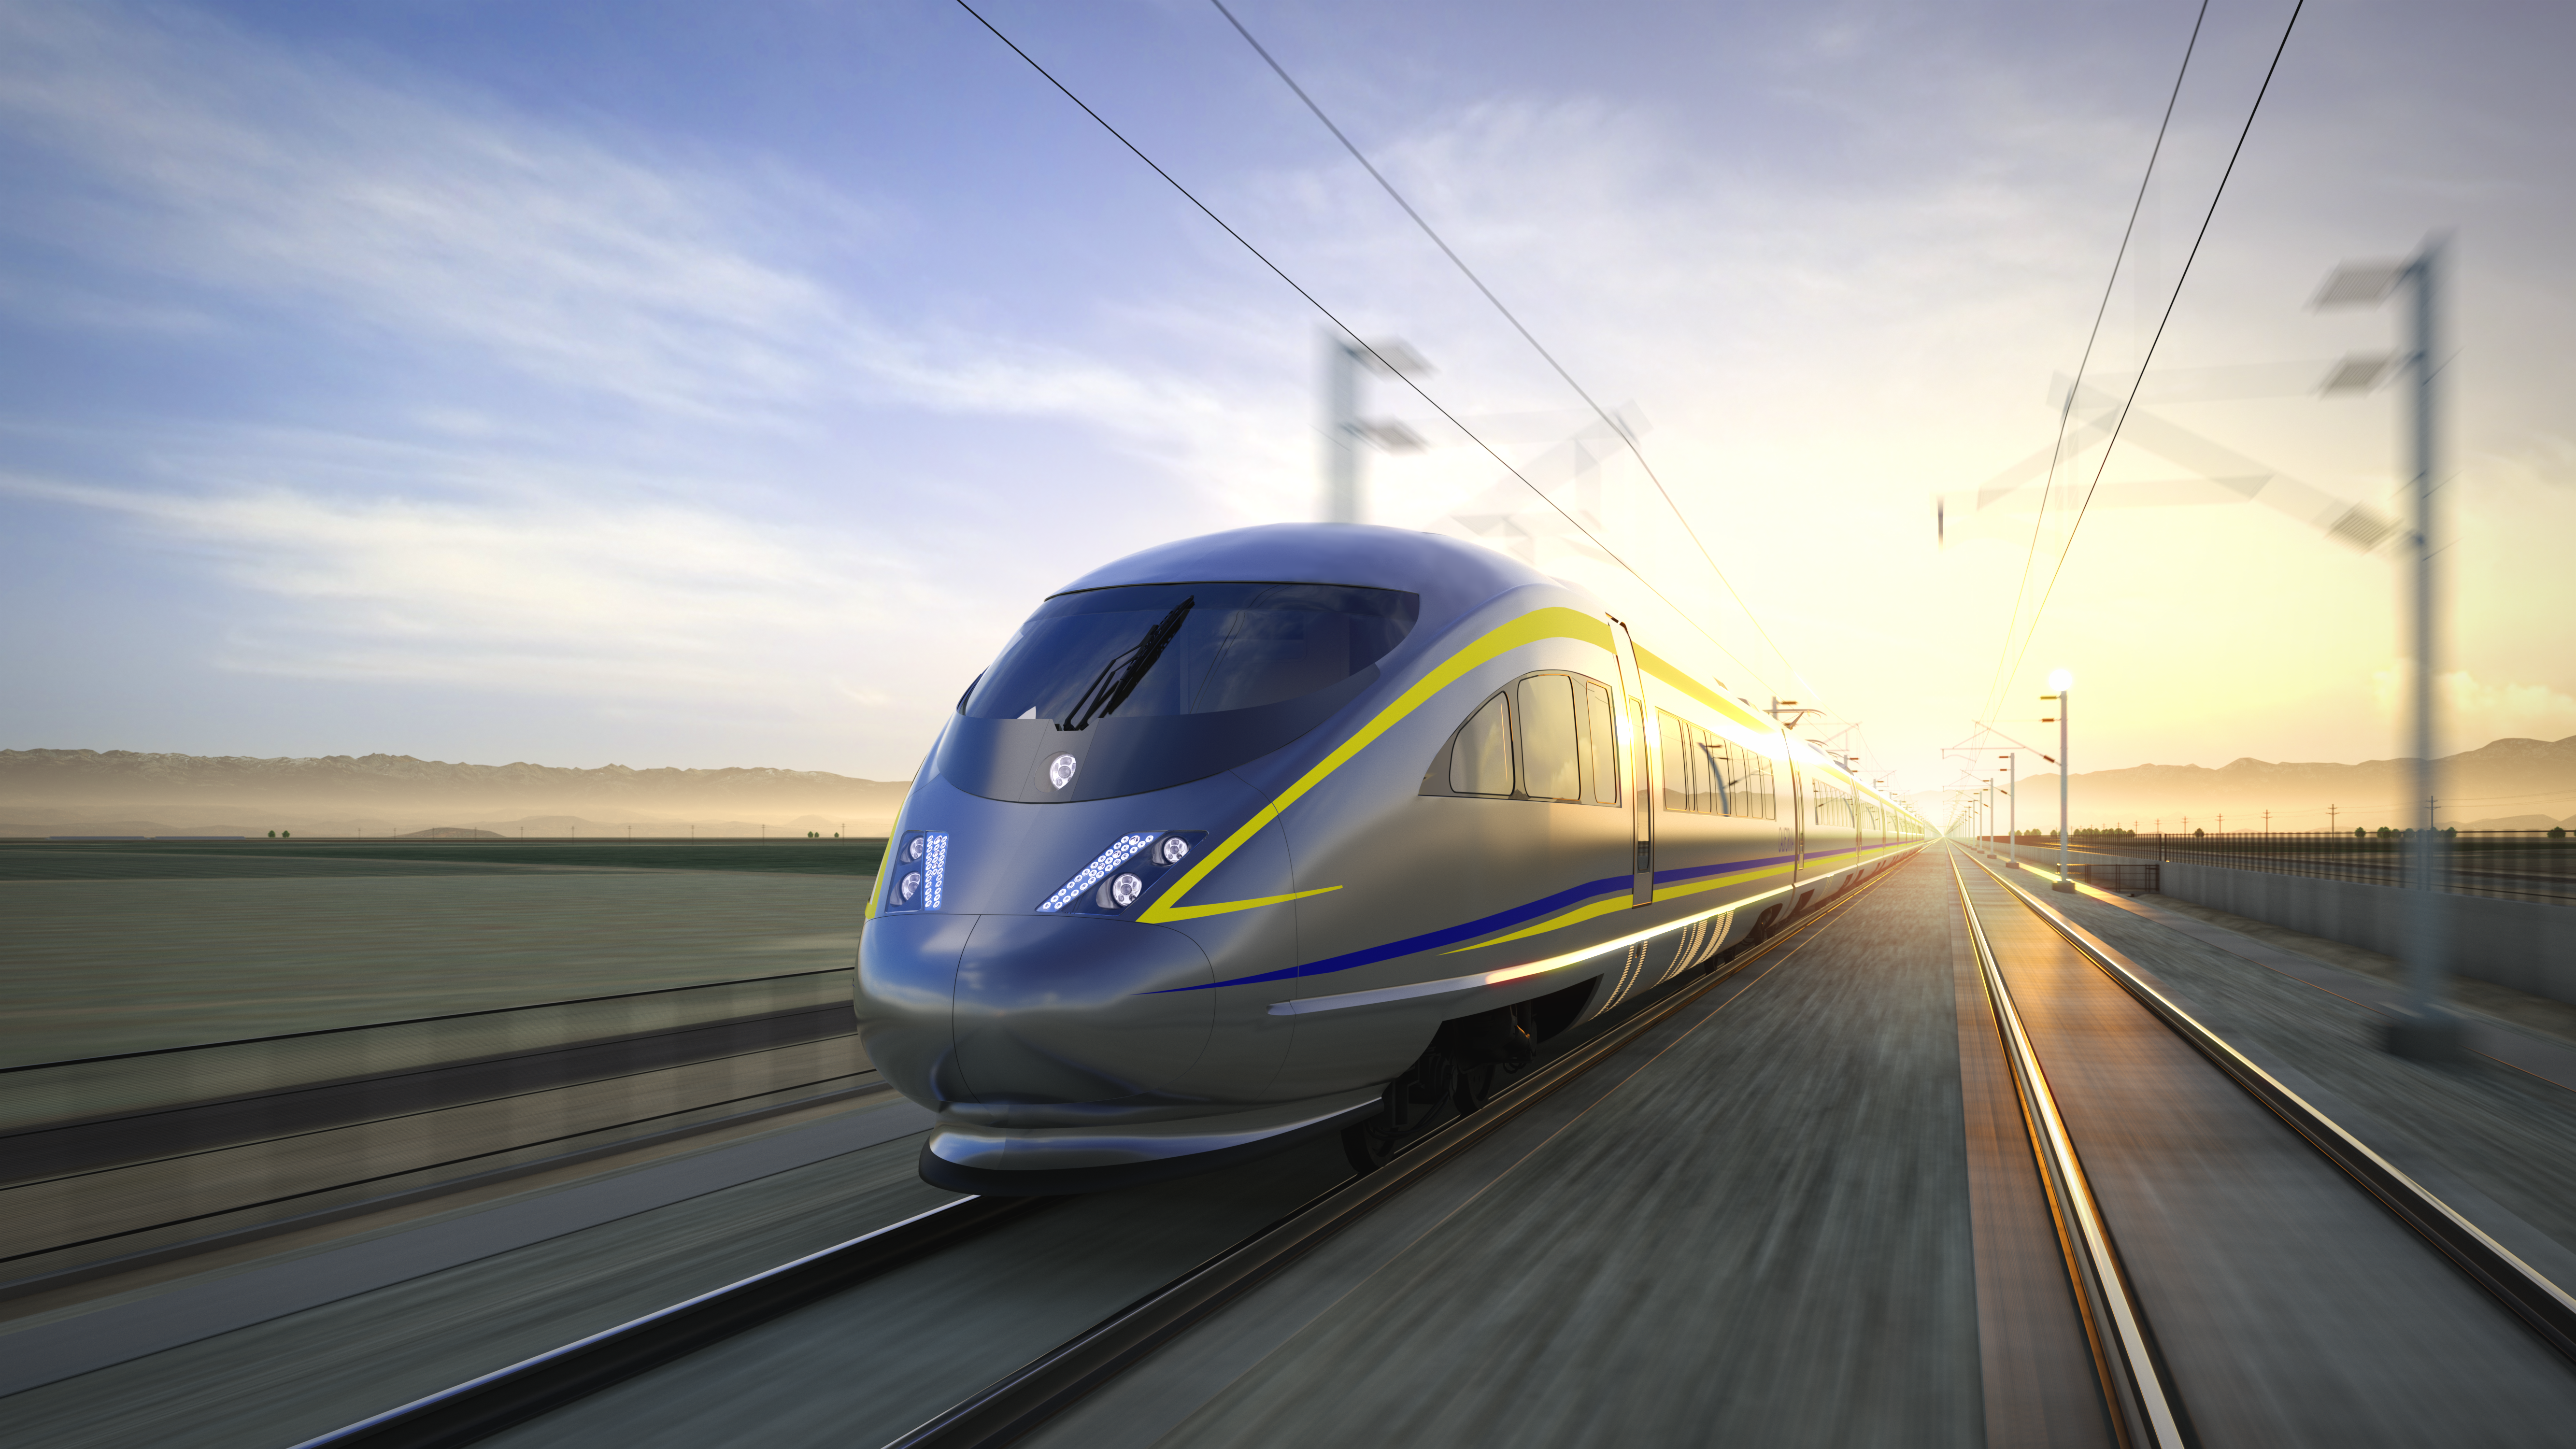 California High-Speed Rail Authority Releases RFQ to Purchase First Trainsets